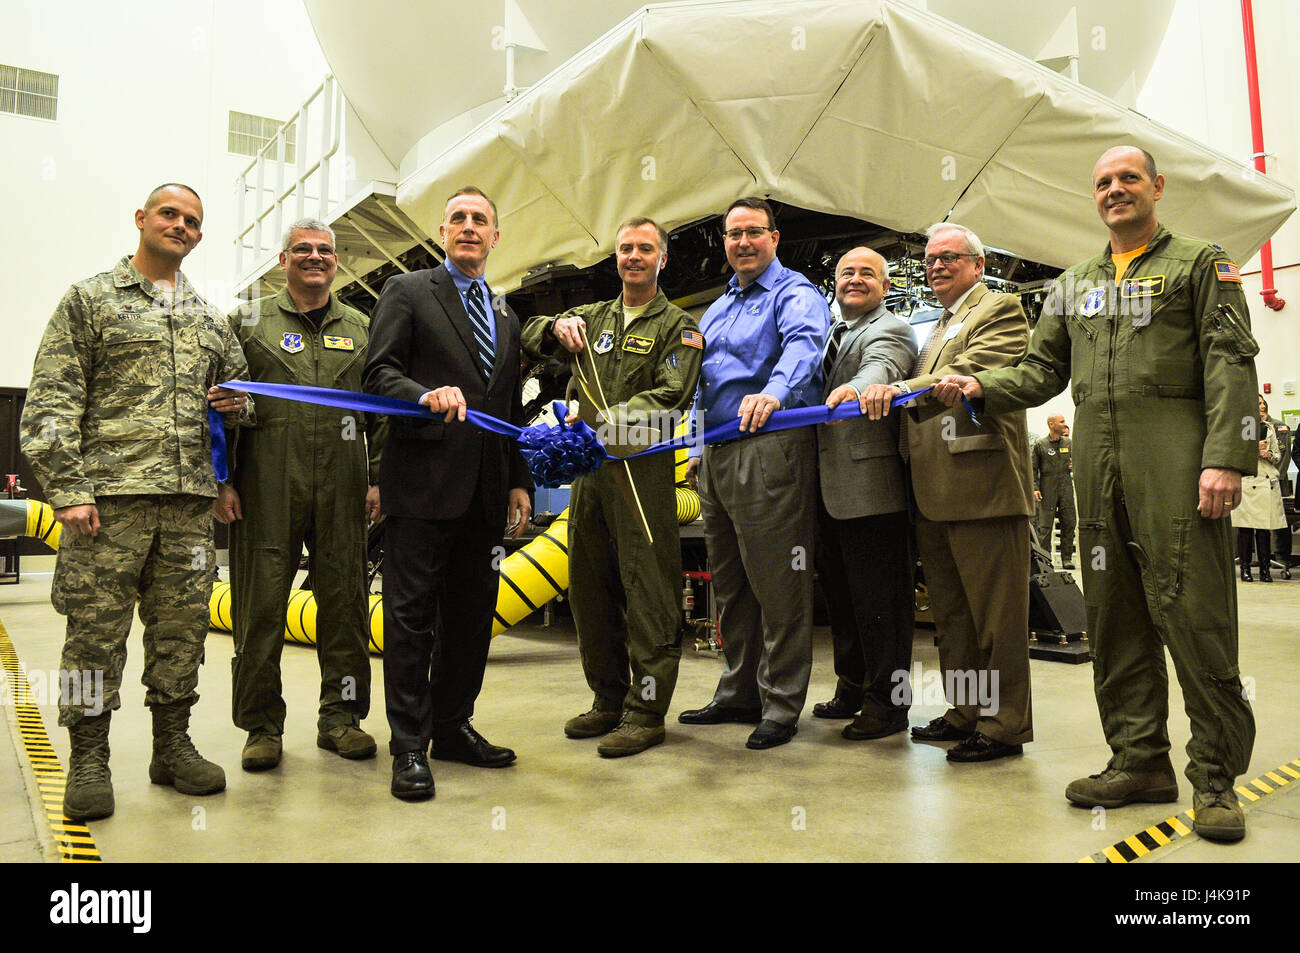 A ribbon is cut to signify the opening of a KC-135 flight simulator at the 171st Air Refueling Wing near Pittsburgh Pa. May 5, 2017. Holding the ribbon from left to right is Maj. Jeremy Ketter, Commander of the 171 Civil Engineer Squadron, Brig. Gen. Tony Carrelli, Pennsylvania Adjutant General, Congressman Tim Murphy, representing the 18th district of Pennsylvania, Col. Gregg Perez, 171st Wing Commander, Tim Bush, KC-135 Aviation Training System Operations and Maintenance Program Manager for CAE, Cliff Sanchez, KC-135 Aviation Training System Manager at Air Mobility Command, Rep. Mark Mustio, Stock Photo